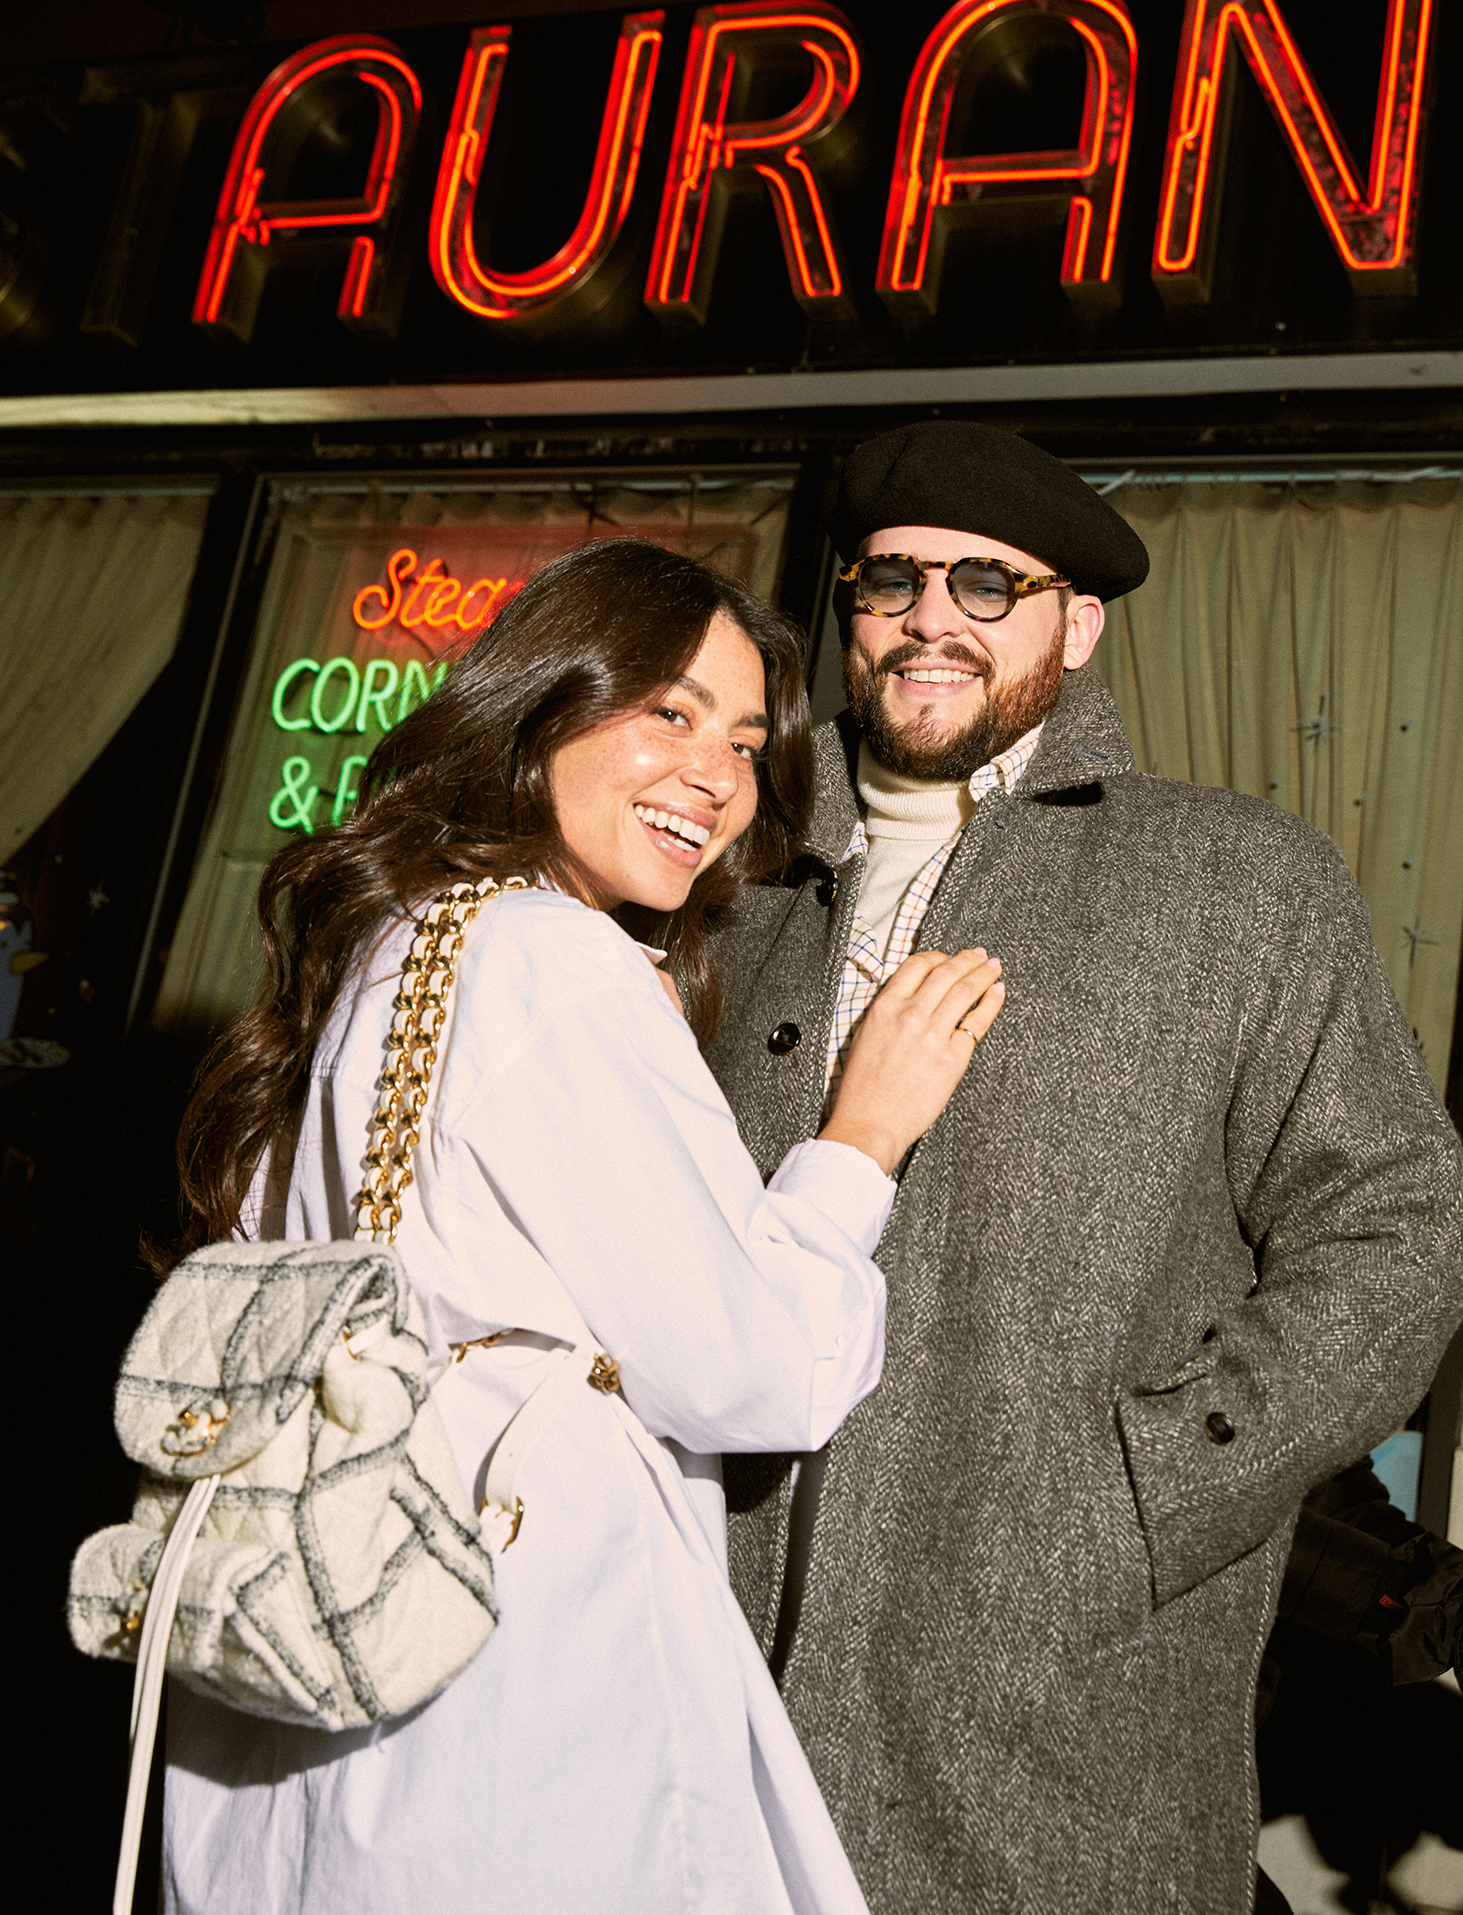 Cosmopolitan on X: Watch These Couples Try On Each Other's